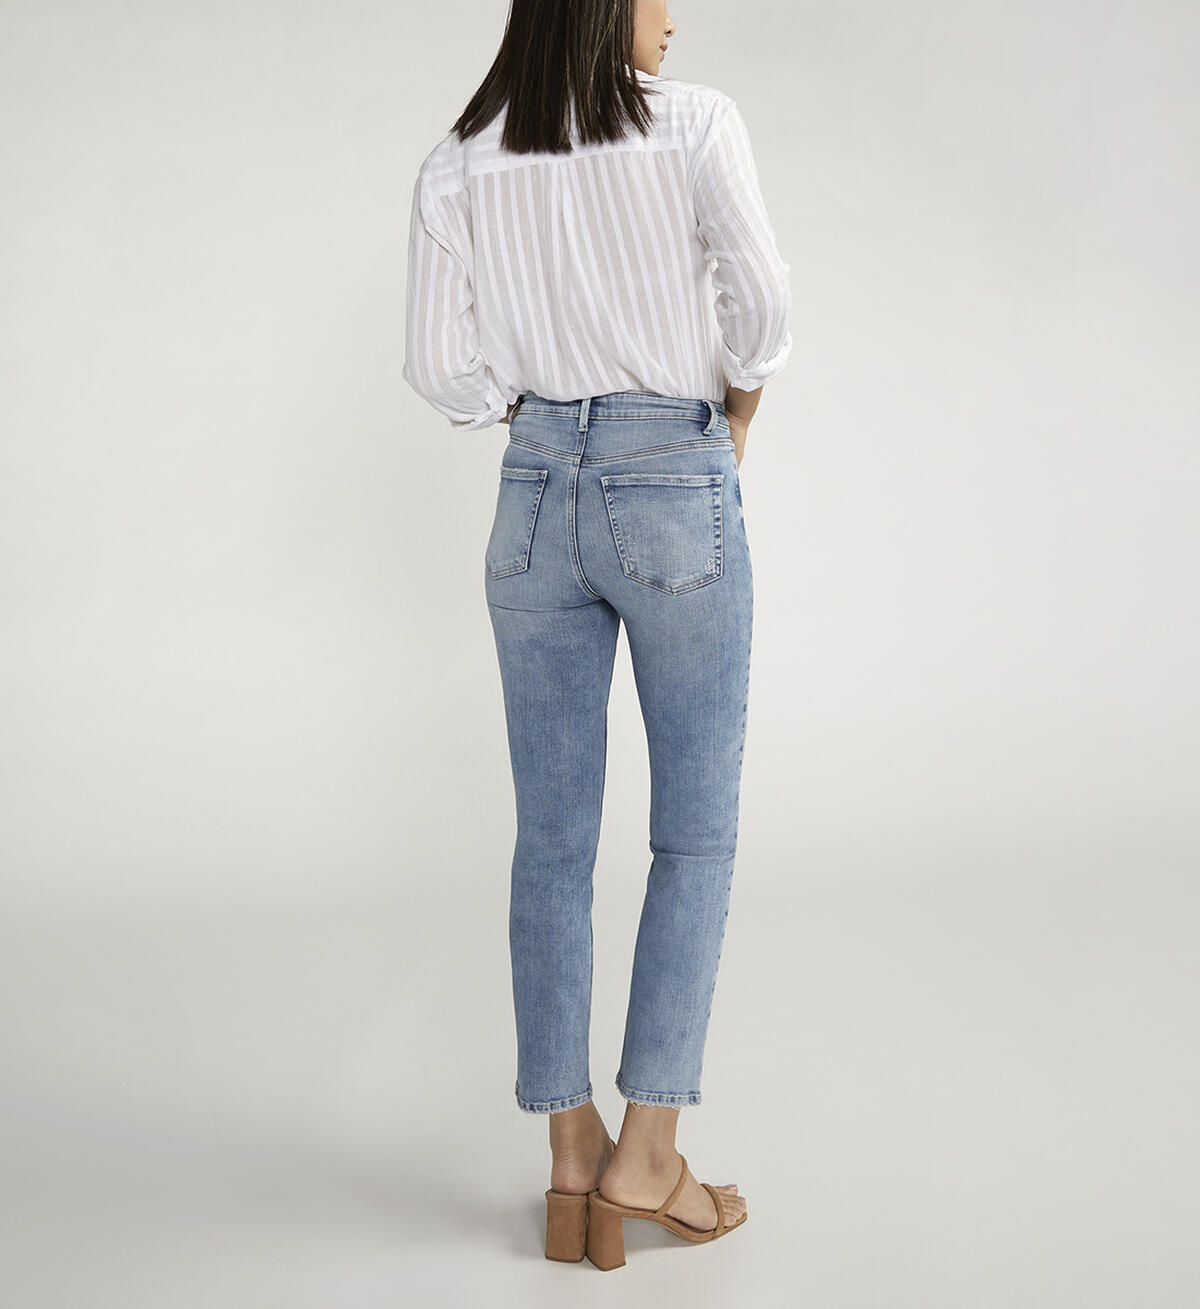 Isbister High Rise Straight Leg Jeans, , hi-res image number 1